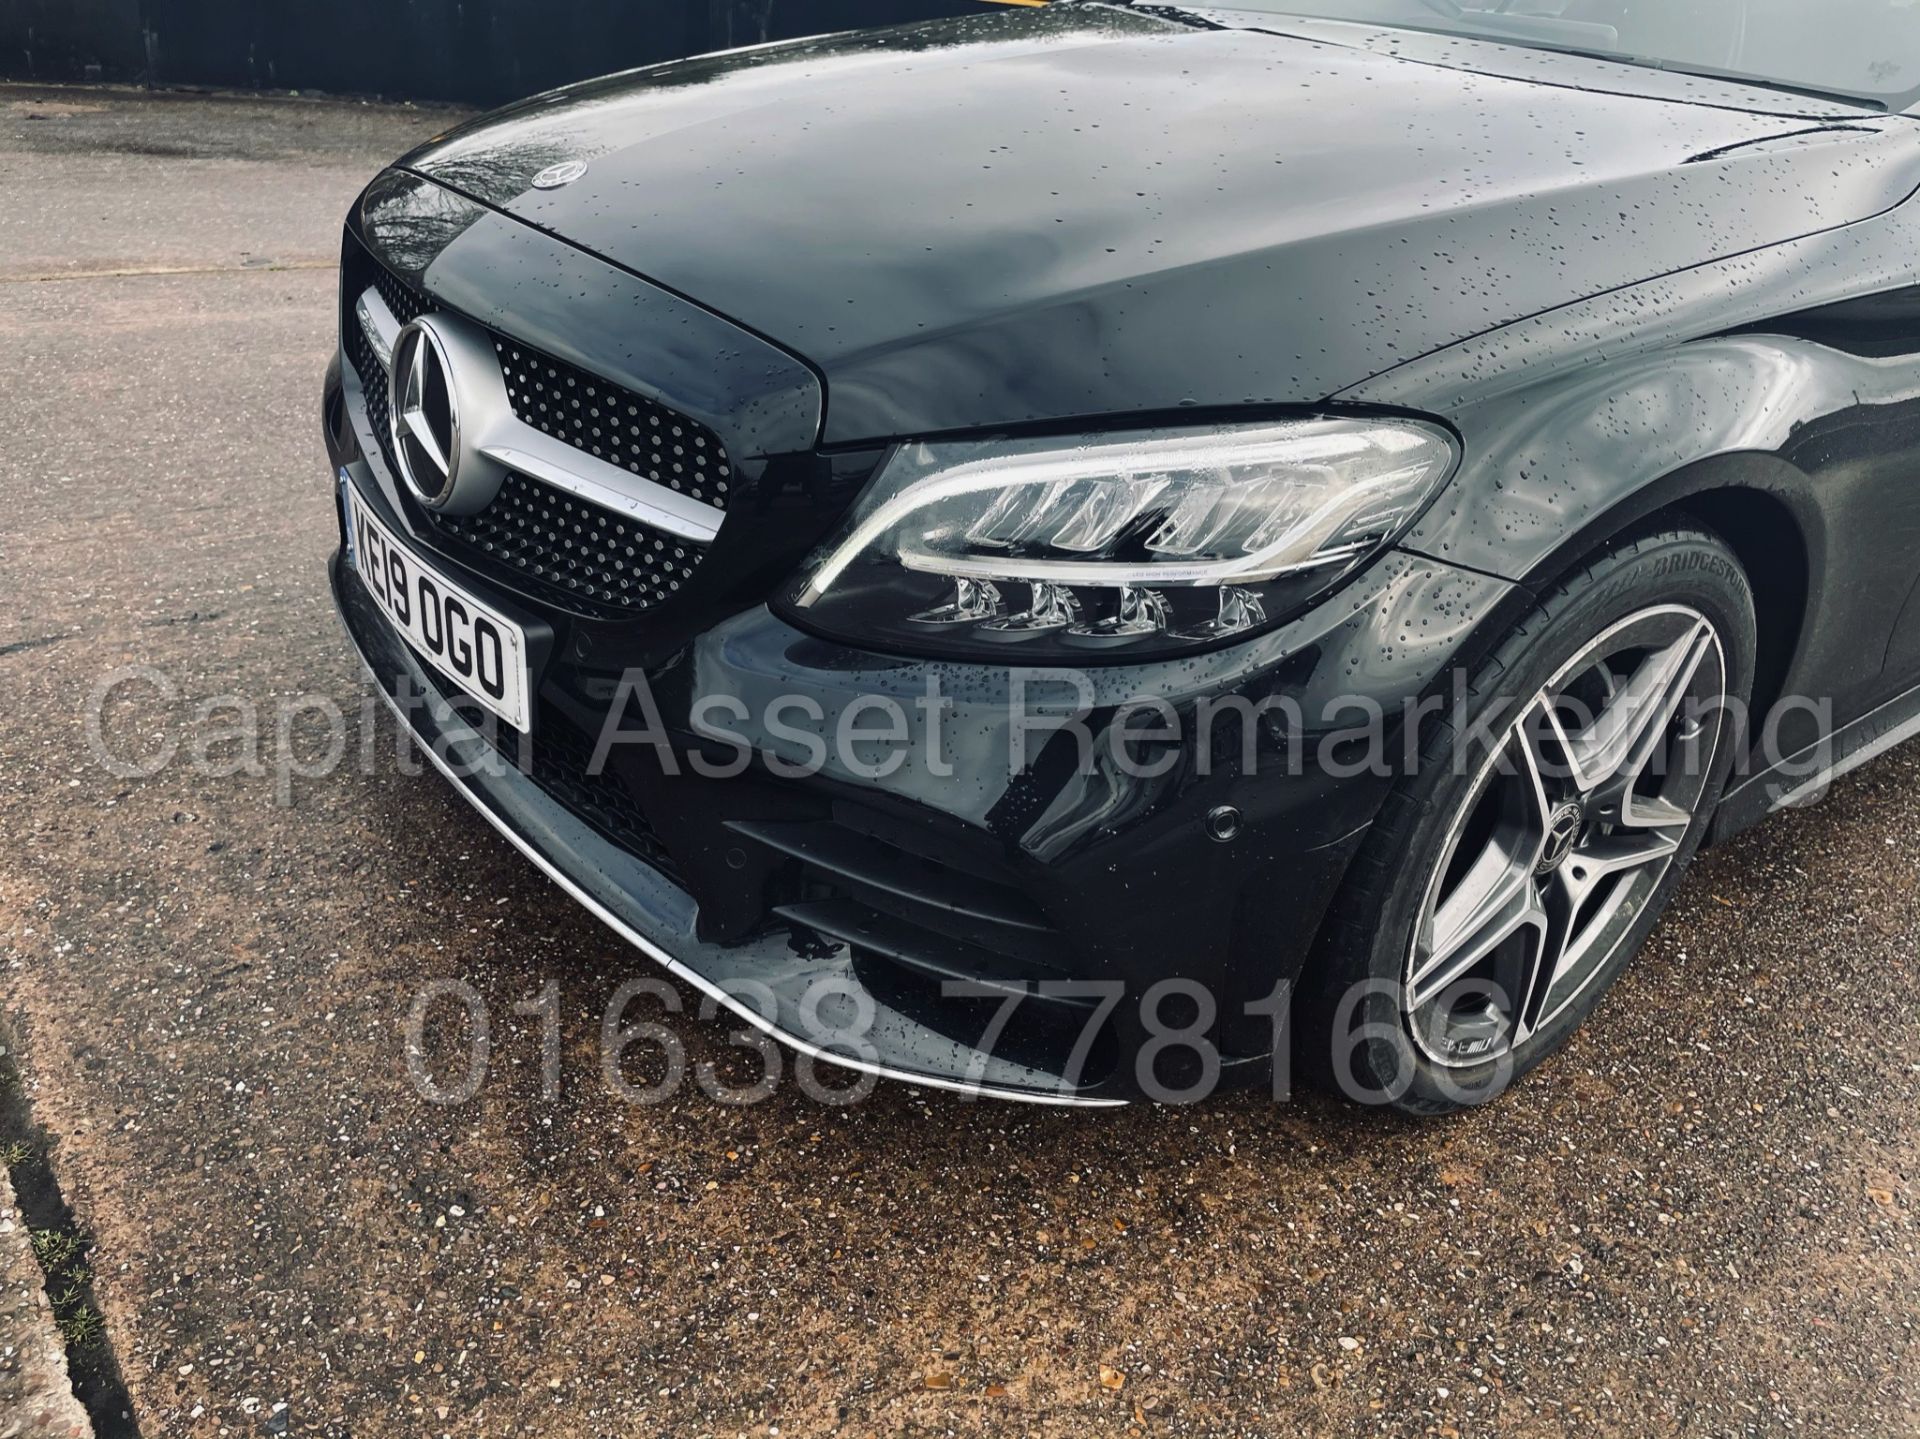 (ON SALE) MERCEDES-BENZ C220D *AMG LINE - CABRIOLET* (2019) '9G TRONIC AUTO - LEATHER - SAT NAV' - Image 30 of 56